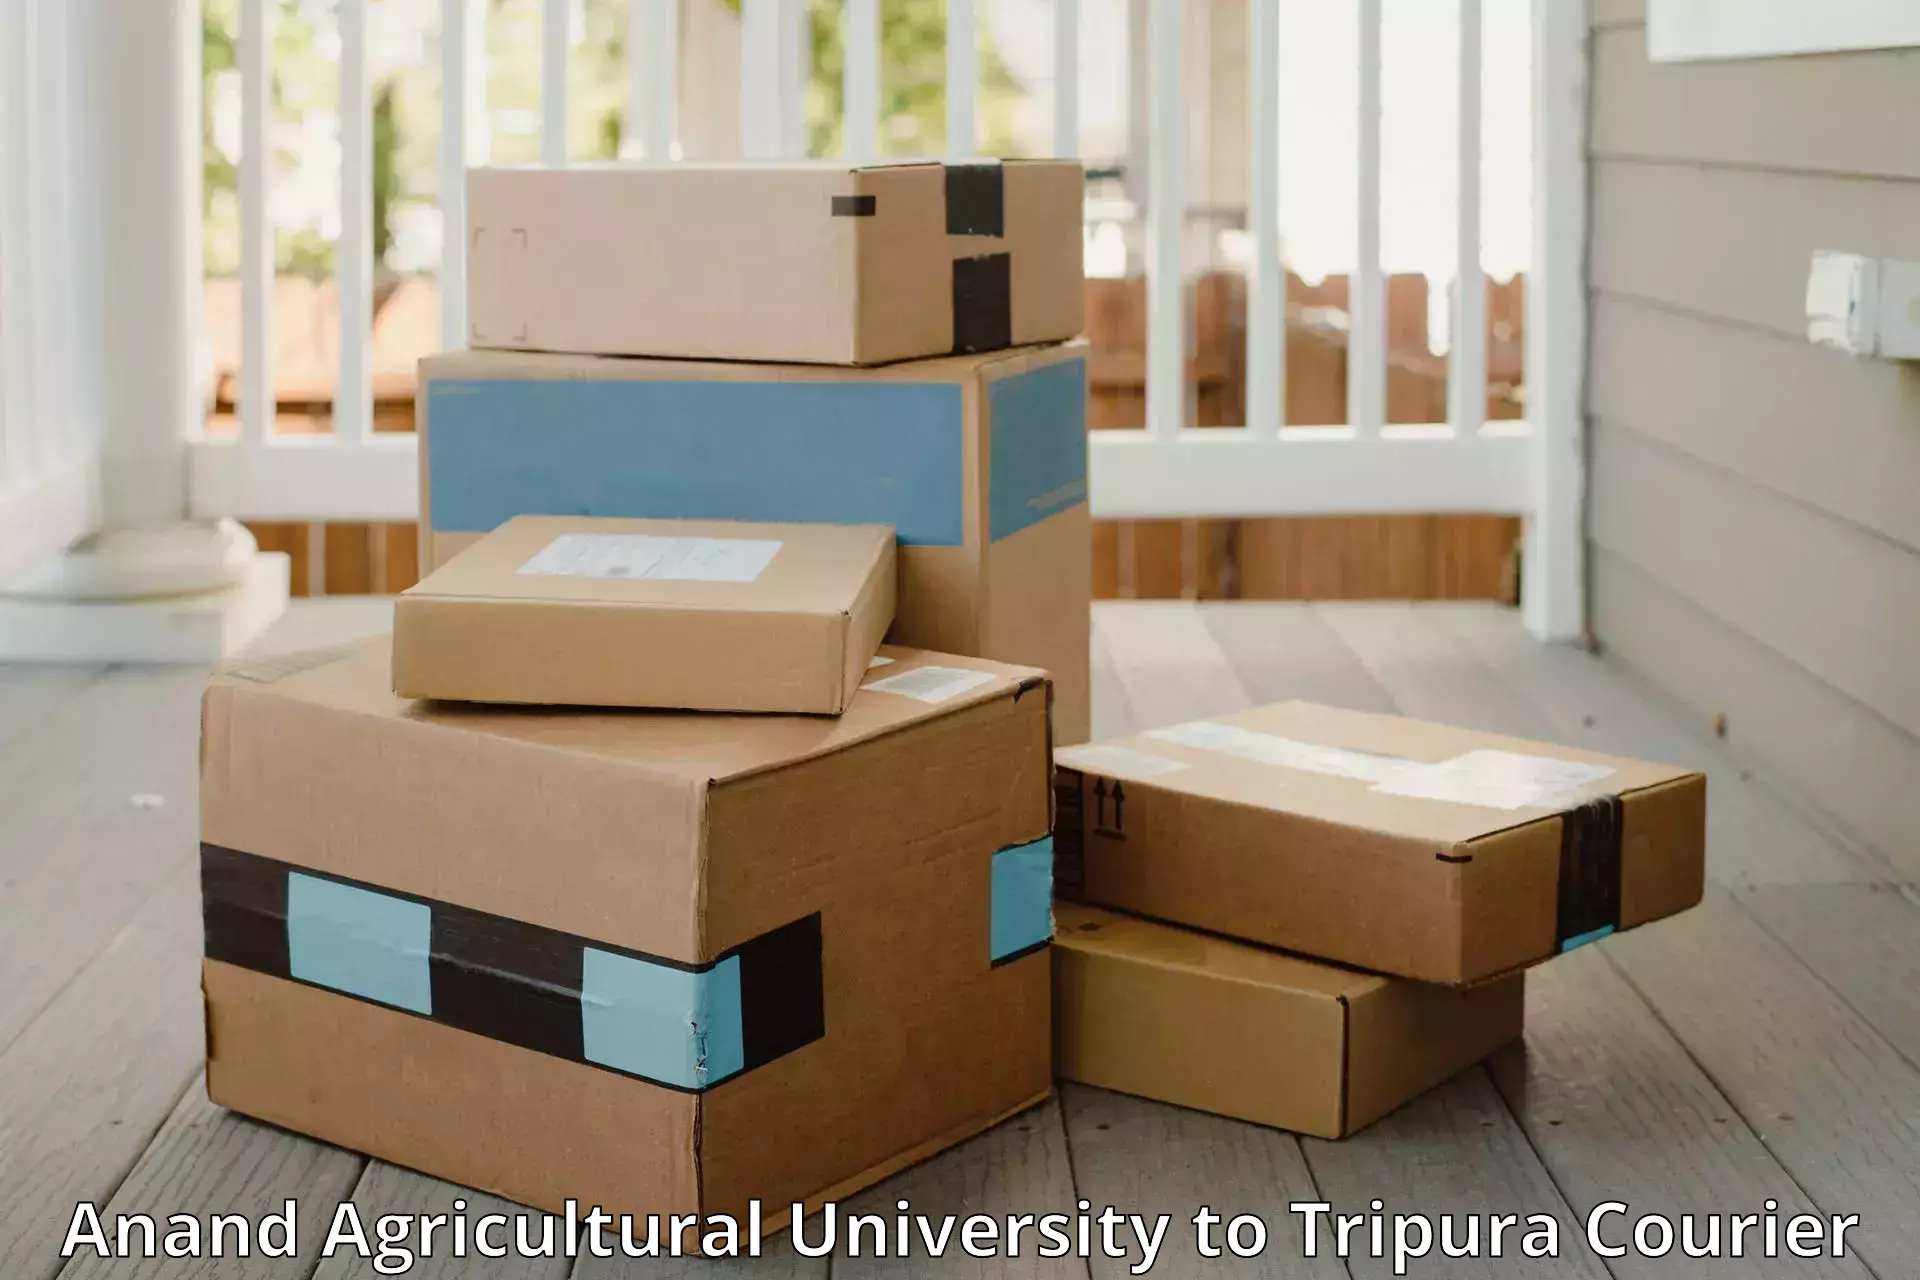 Comprehensive baggage service Anand Agricultural University to Udaipur Tripura